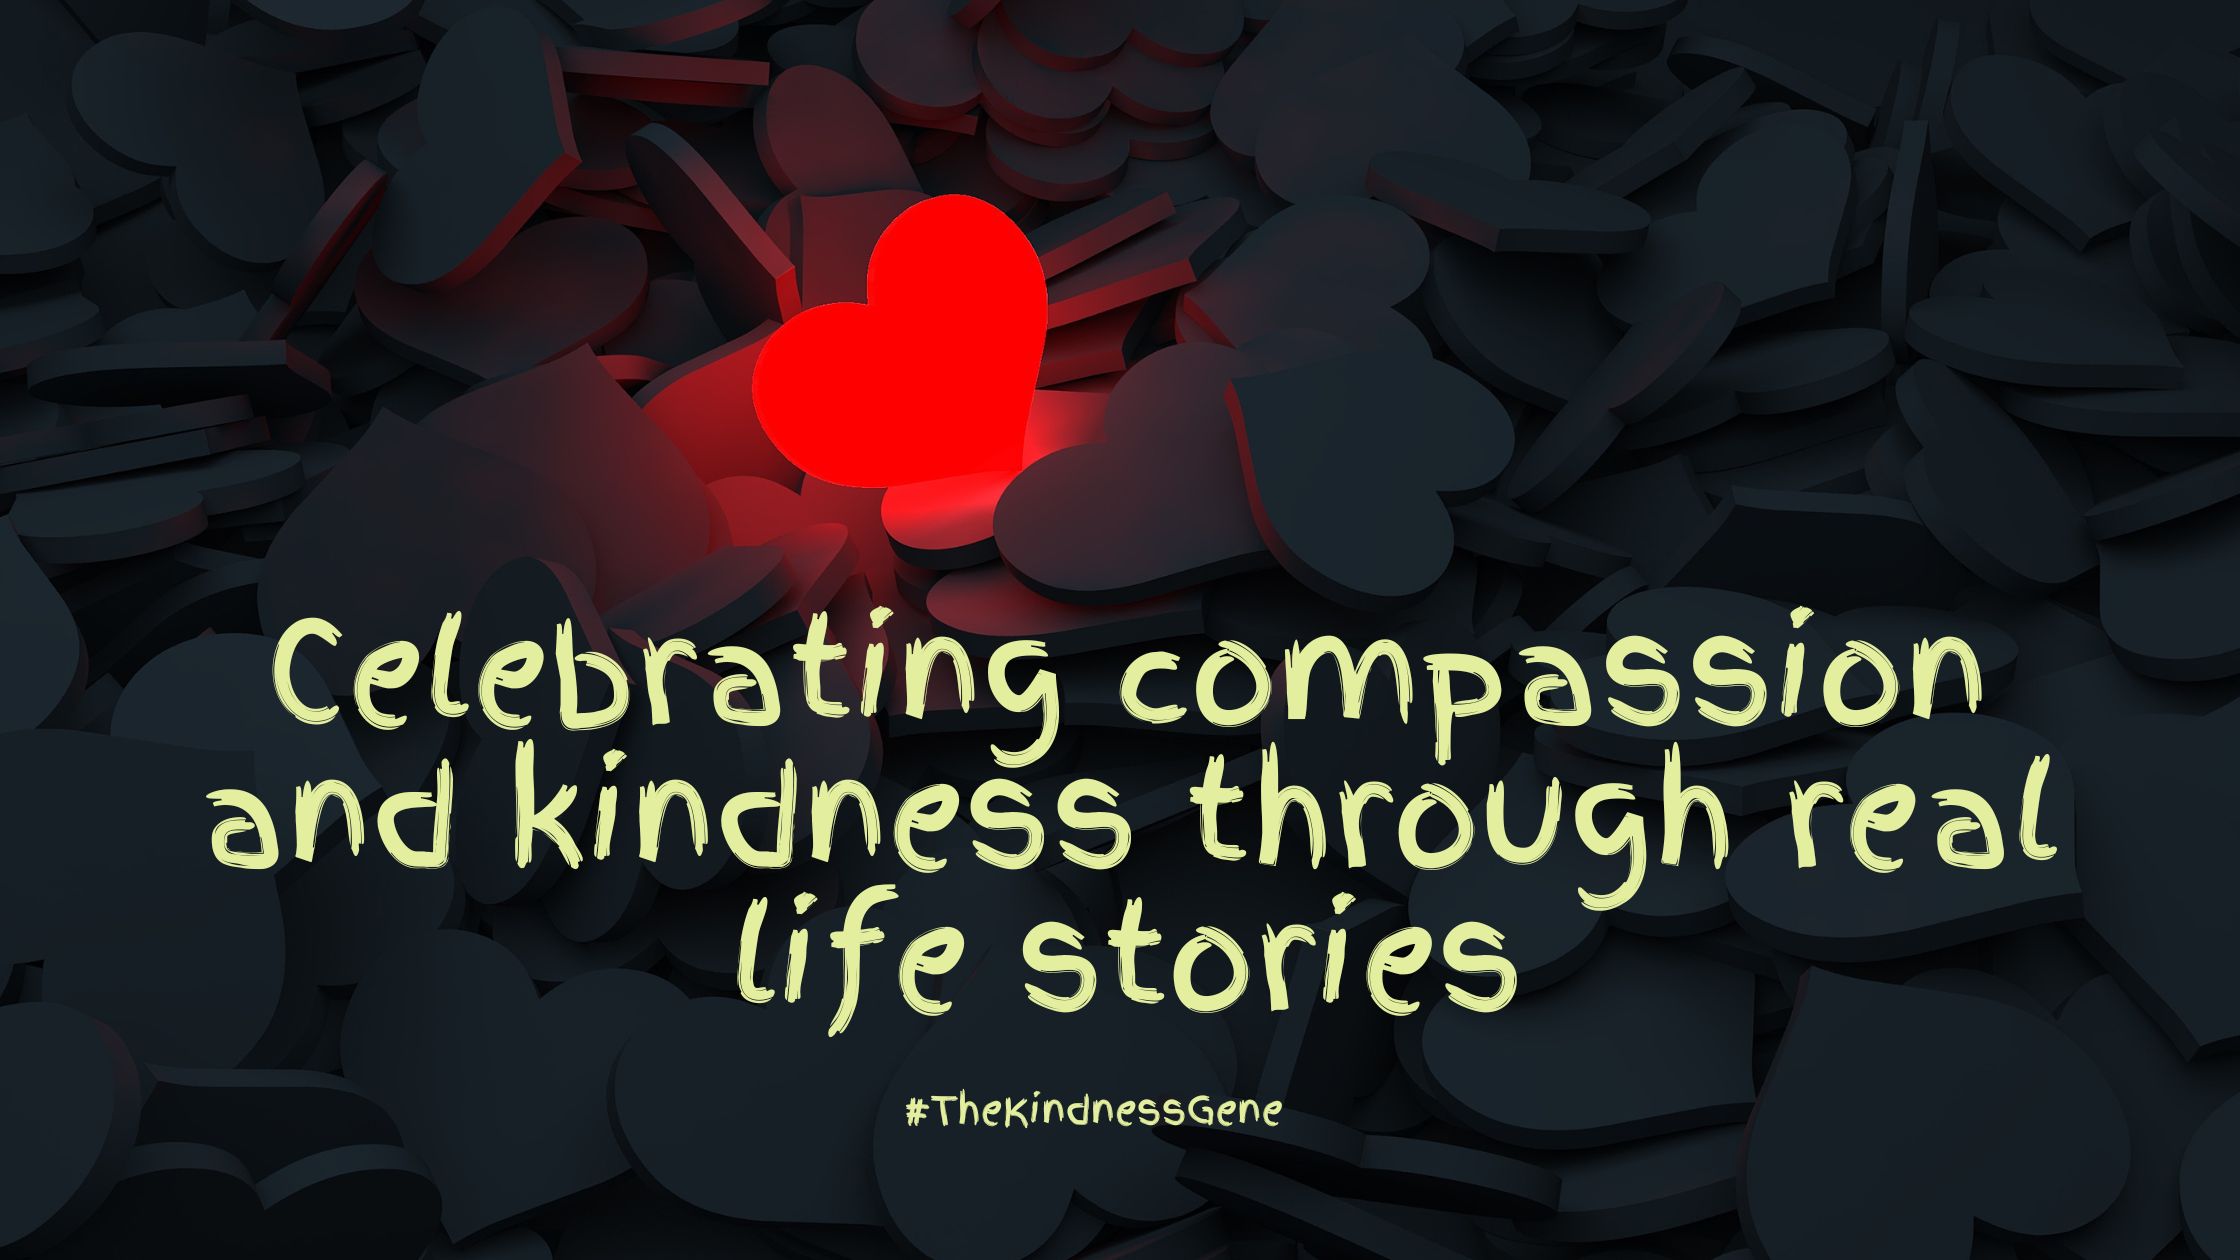 Celebrating compassion and kindness through real life stories